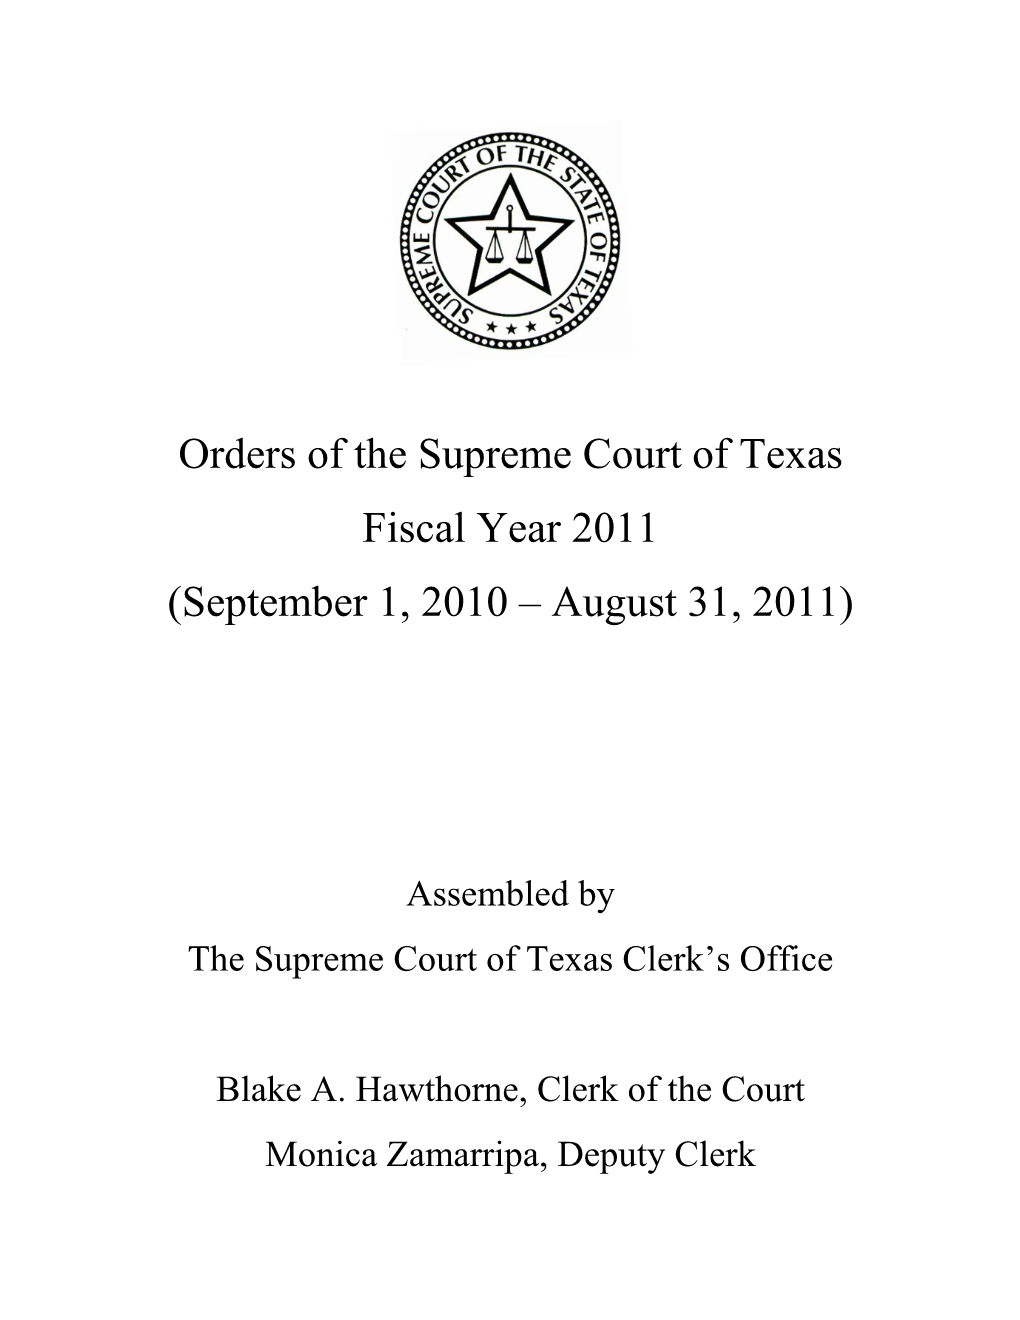 Orders of the Supreme Court of Texas Fiscal Year 2011 (September 1, 2010 – August 31, 2011)